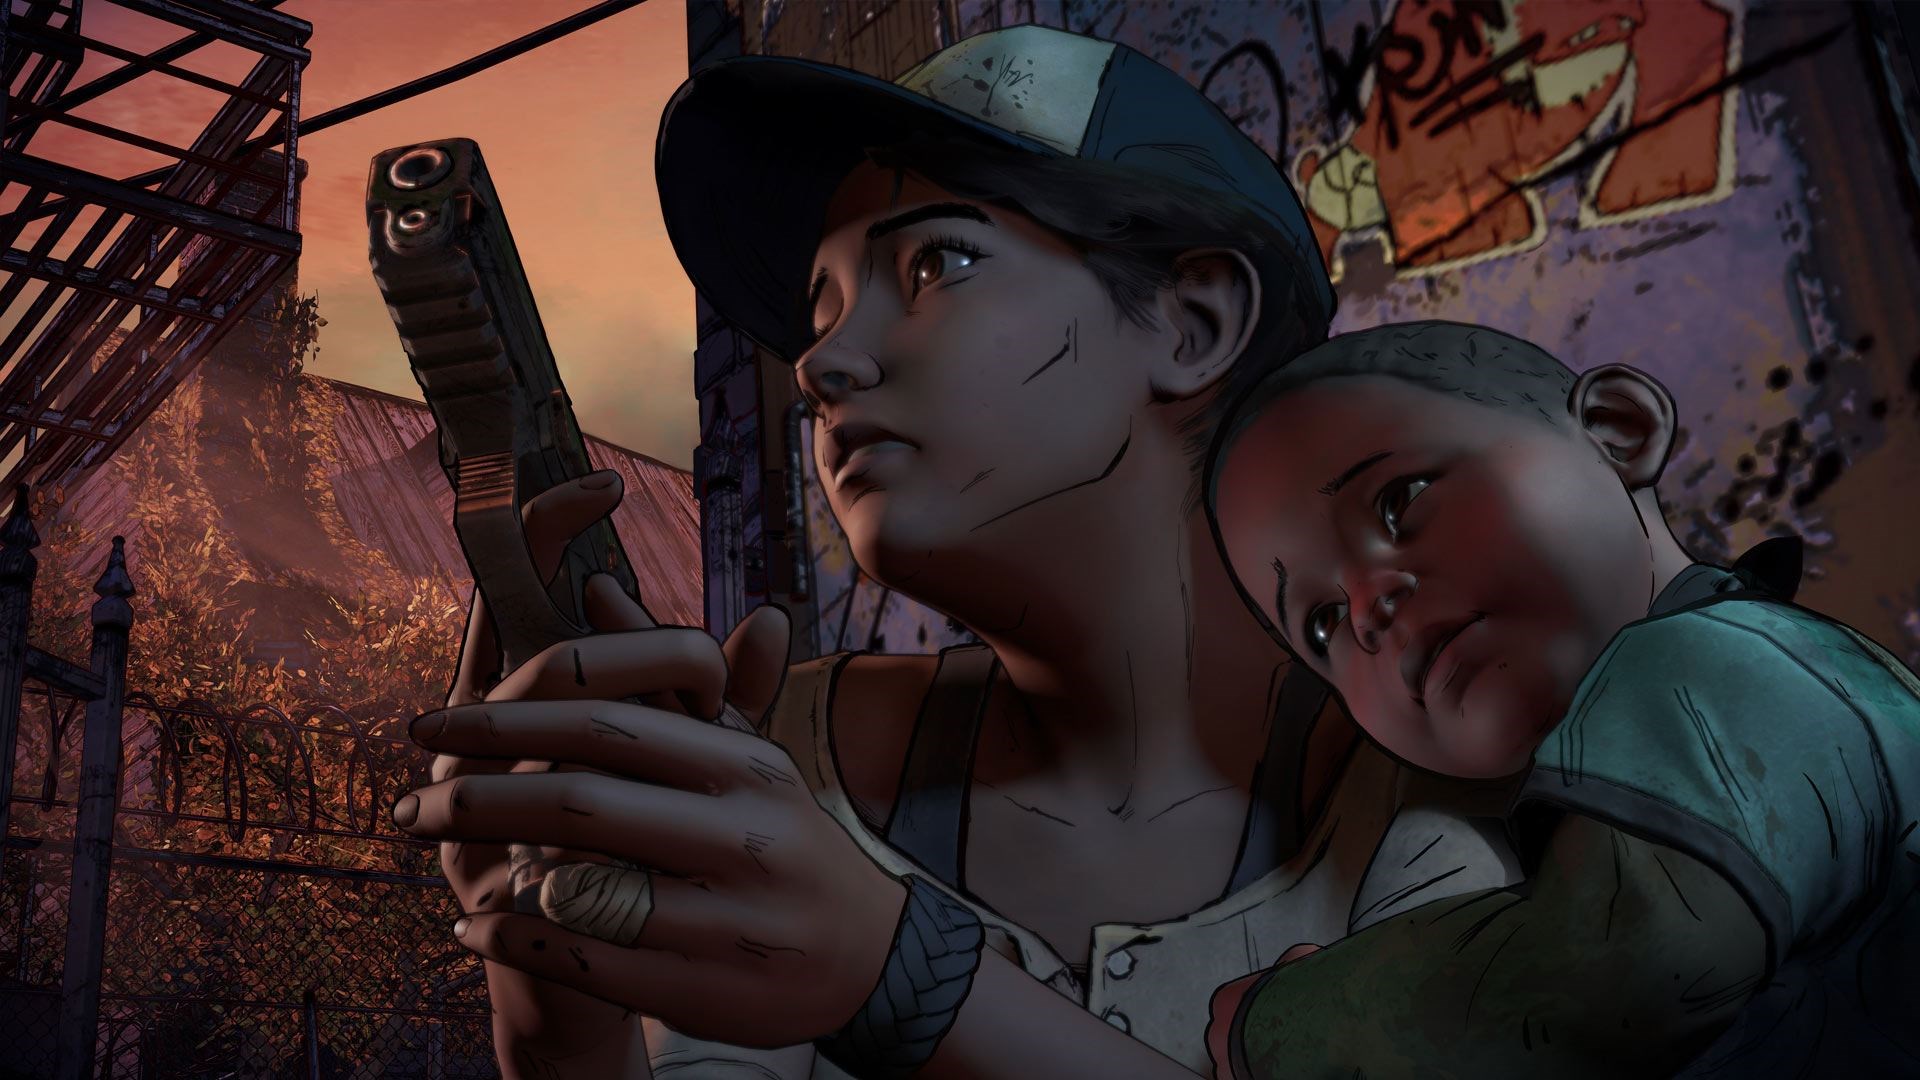 The Walking Dead: A New Frontier - Episode 1-3 (2016/RUS/ENG/MULTi9/Repack) PC